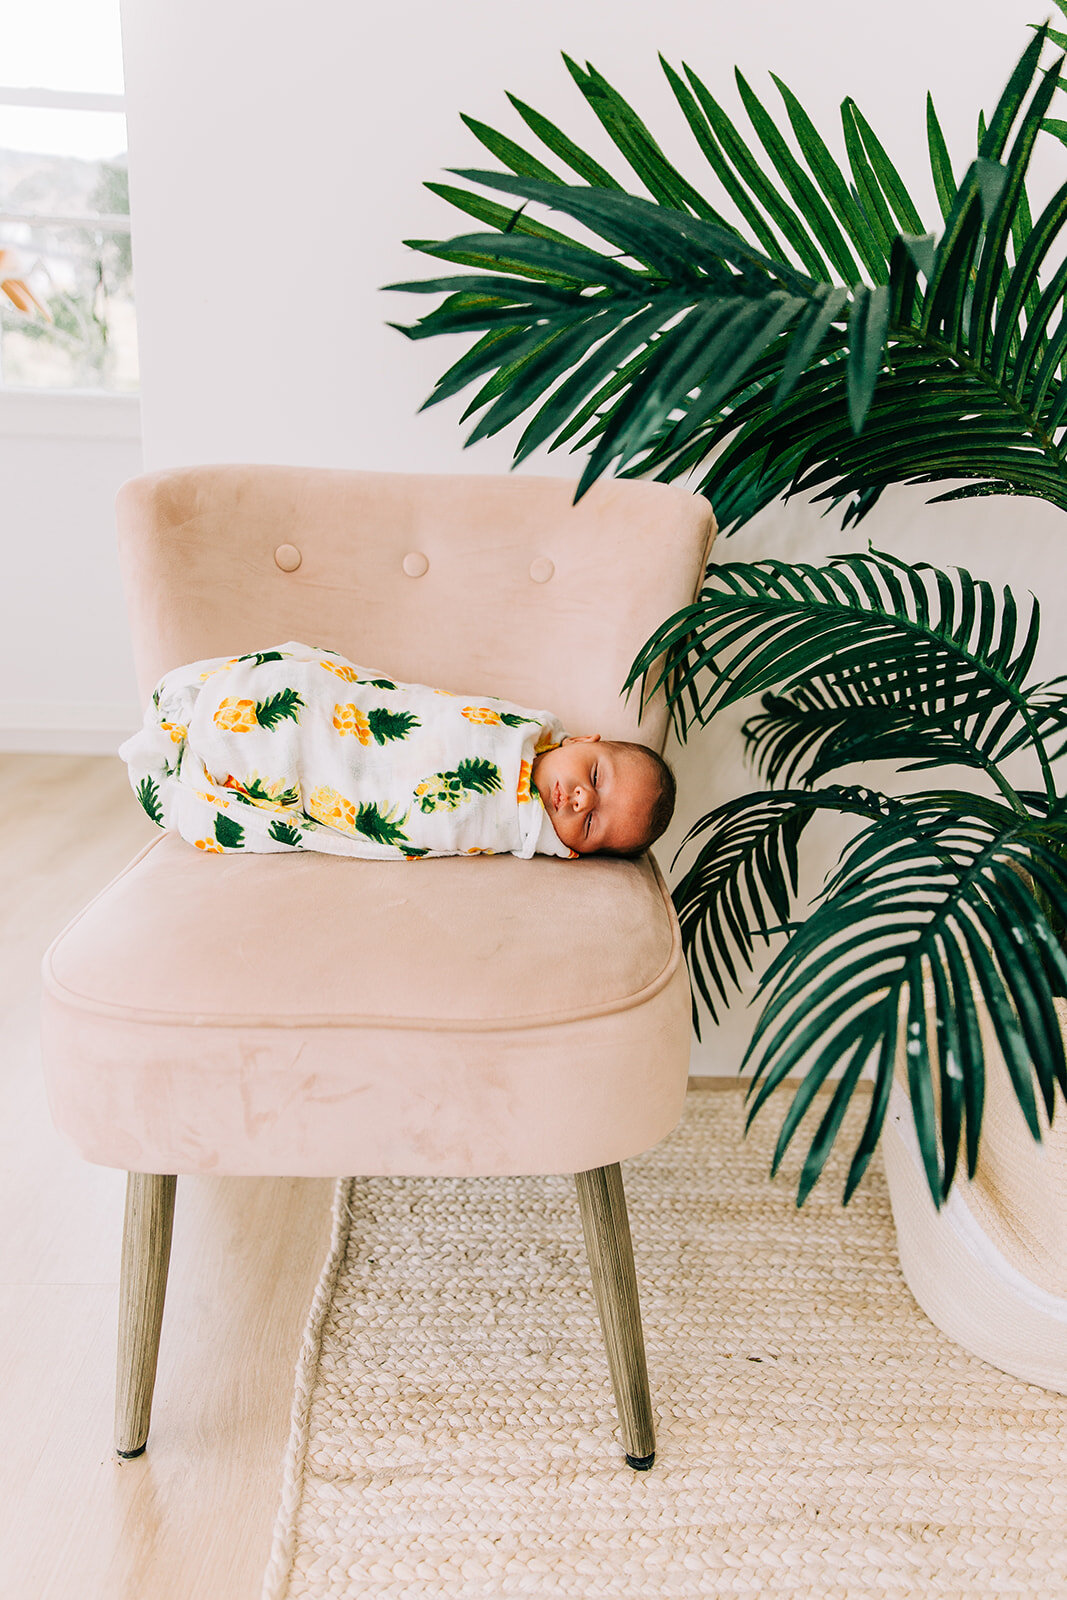  newborn styling inspiration fern prop baby swaddle fresh from heaven baby cheeks baby pose inspiration professional family photographers in logan utah cache valley photographers bella alder photography baby girl newborn photo session professional ph